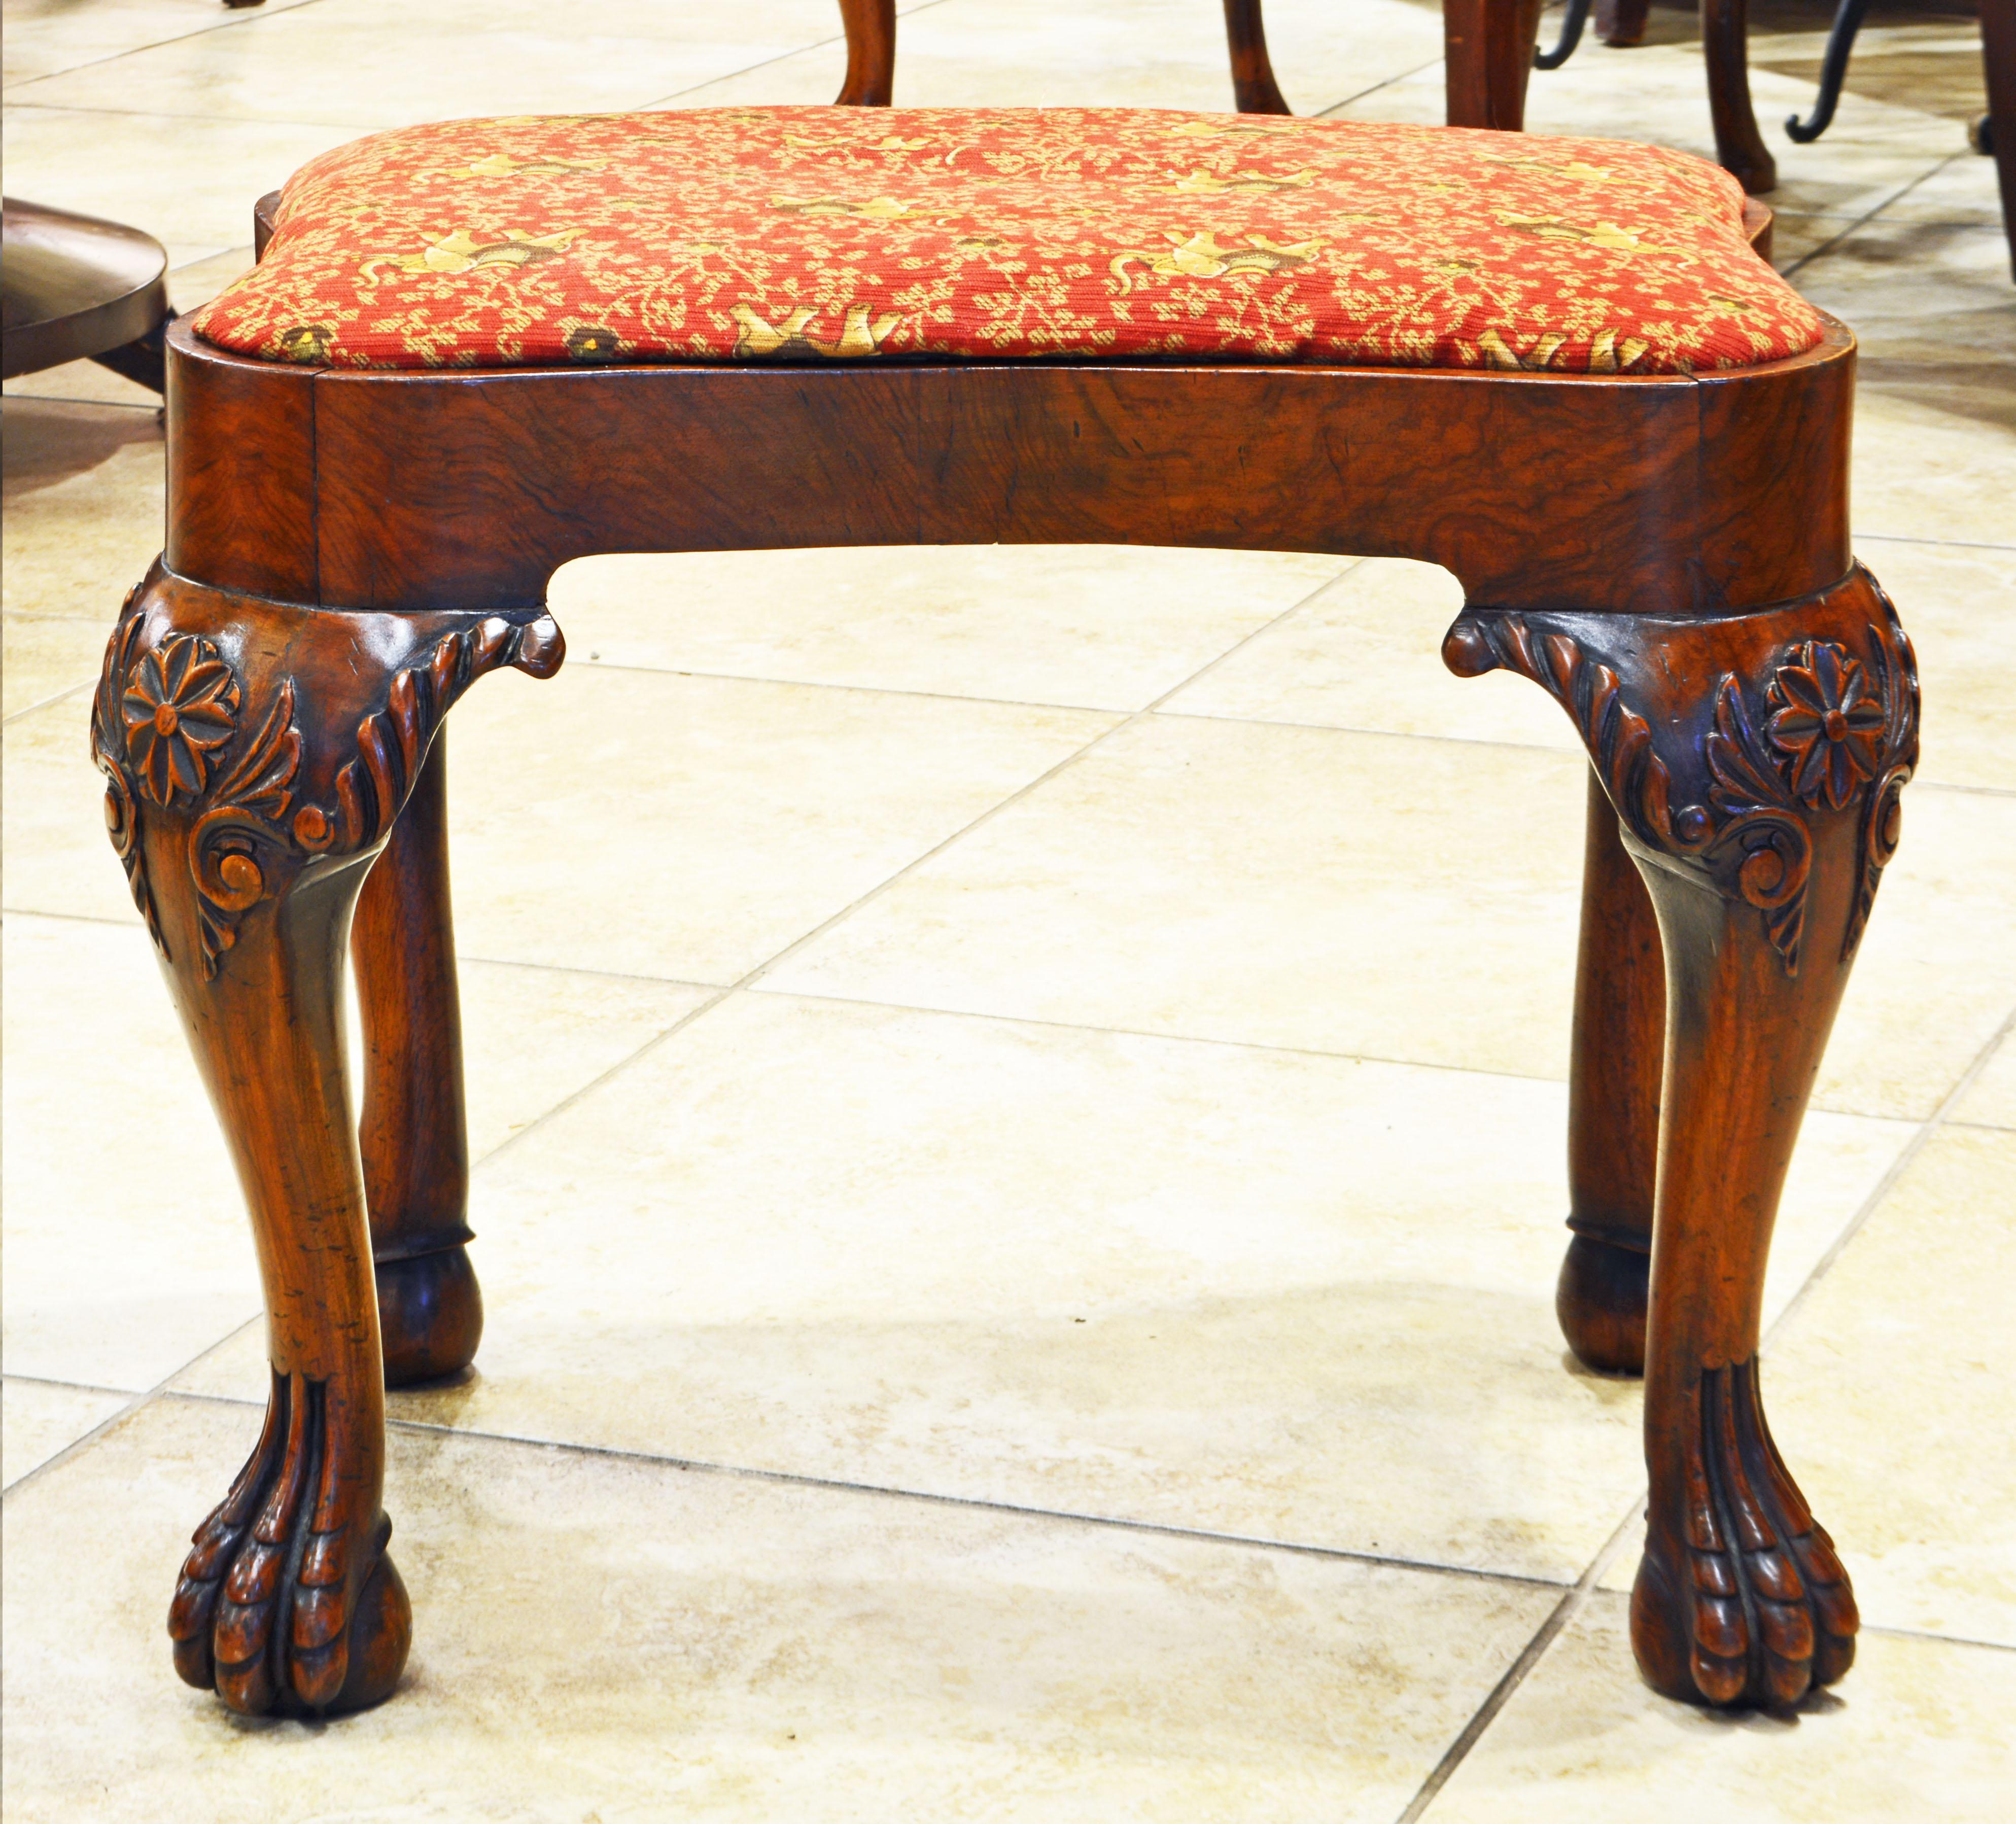 This late 18th or Early 19th century Chippendale mahogany bench features a shaped and covered detachable seat supported by four boldly carved cabriole legs ending in carved claw and ball feet.